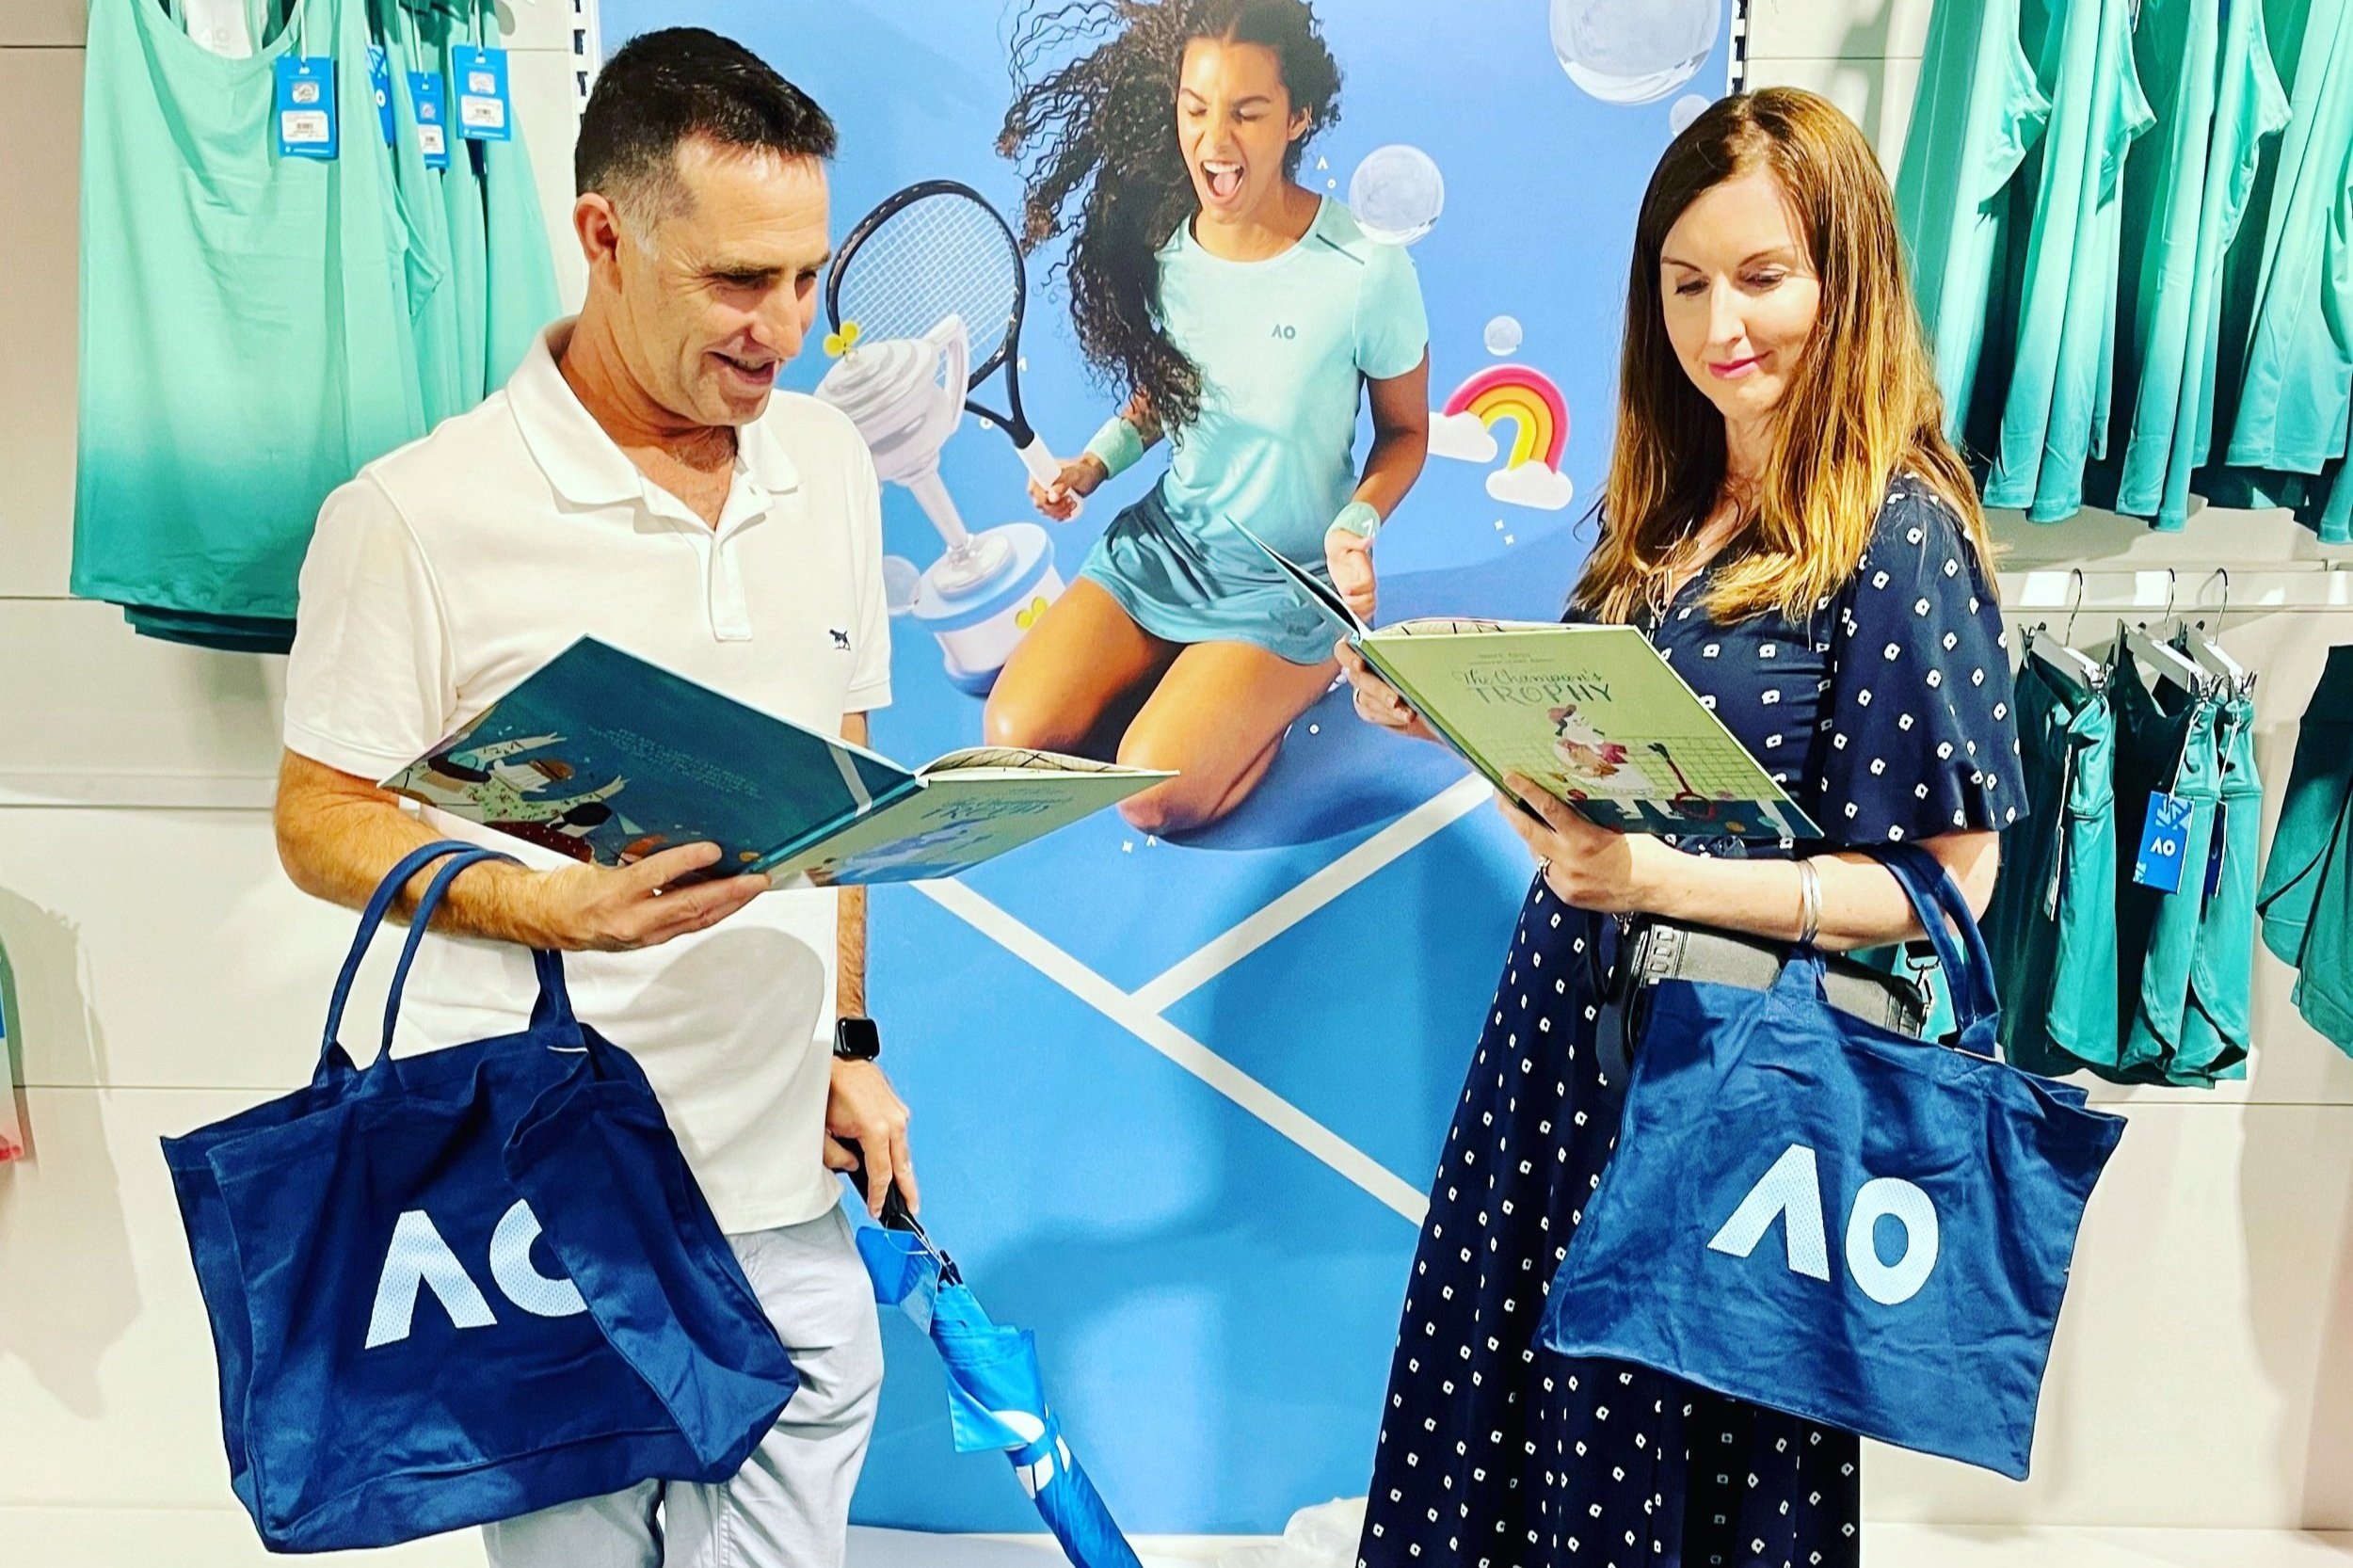  The Champion’s Trophy by Aimee Chan onsale at the official merchandise store of the Australia Open Grand Slam tennis tournament in Melbourne 